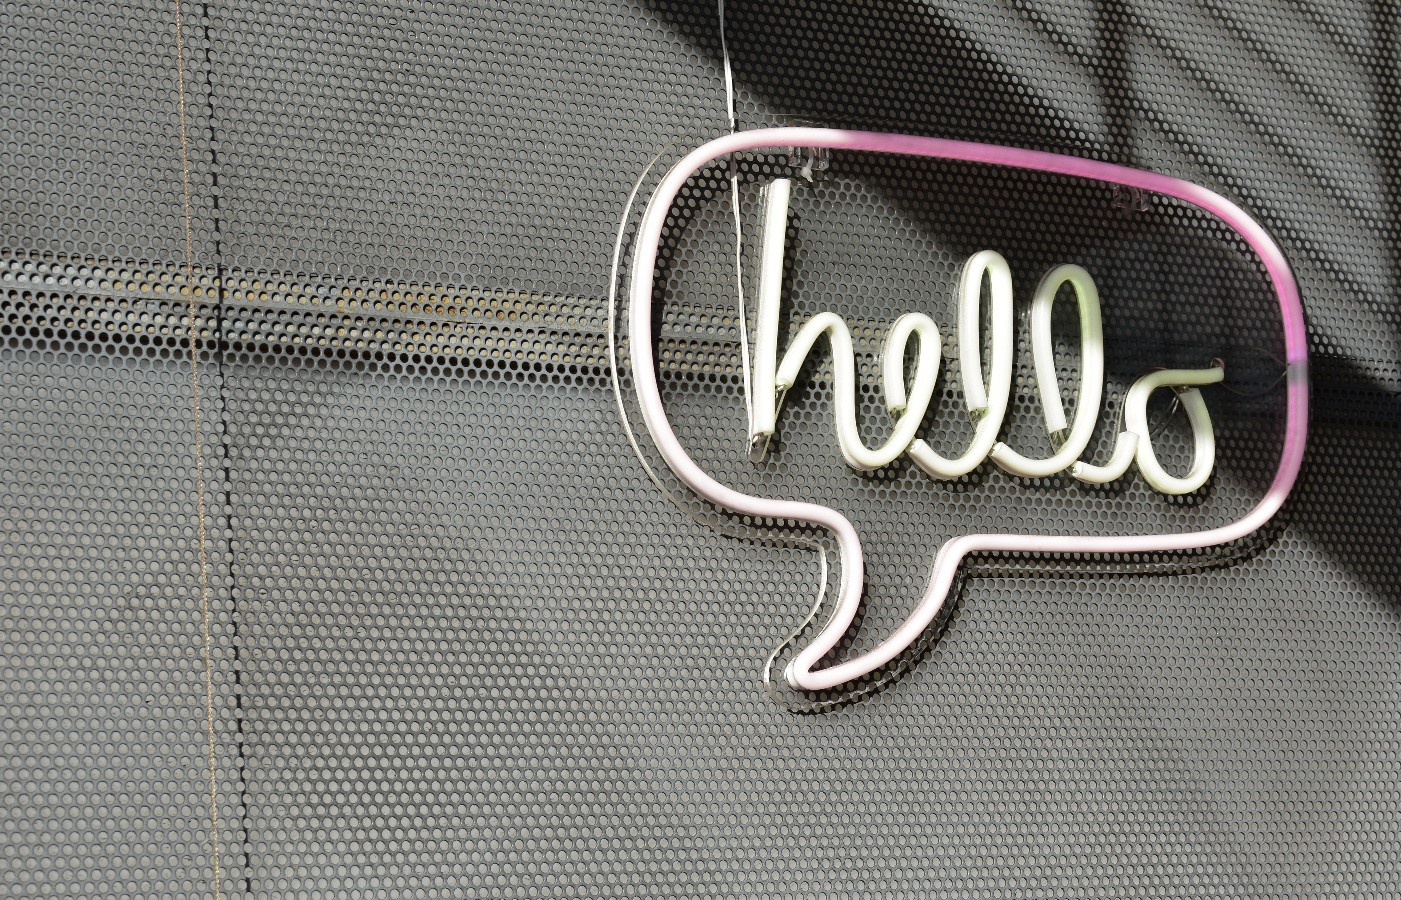 Sign showing the text 'Hello'